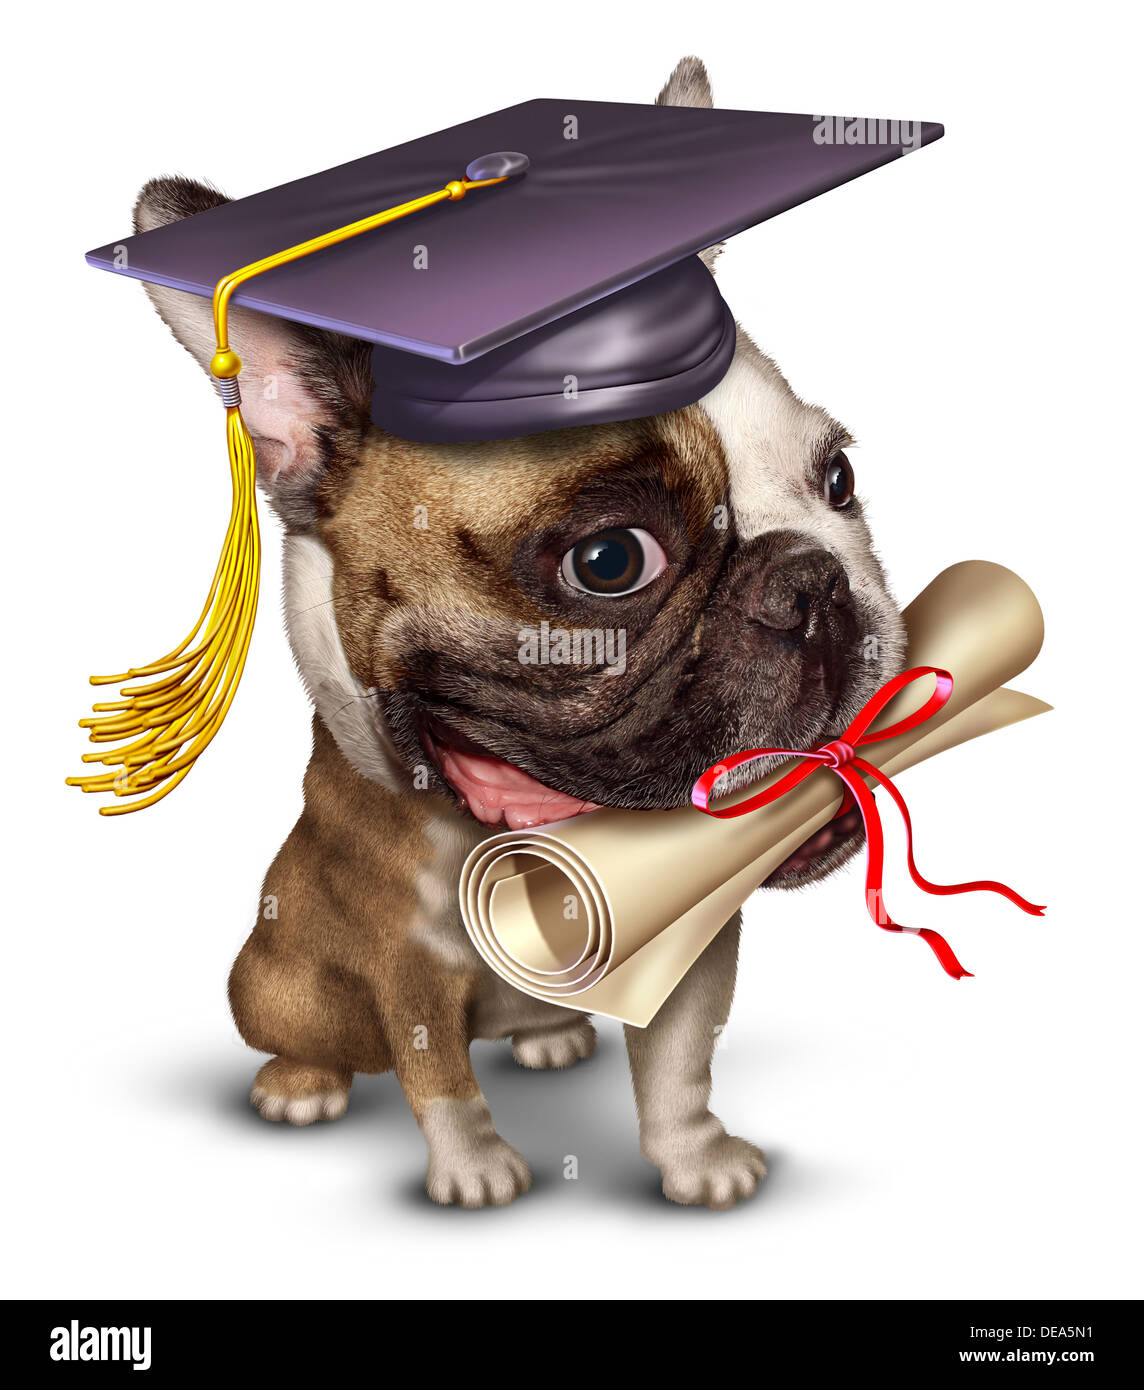 Dog training pet school concept with a bull dog wearing a graduation holding a diploma in his mouth as a symbol of animal obedience education and veterinary guidance in a dynamic forced perspective on a white background. Stock Photo